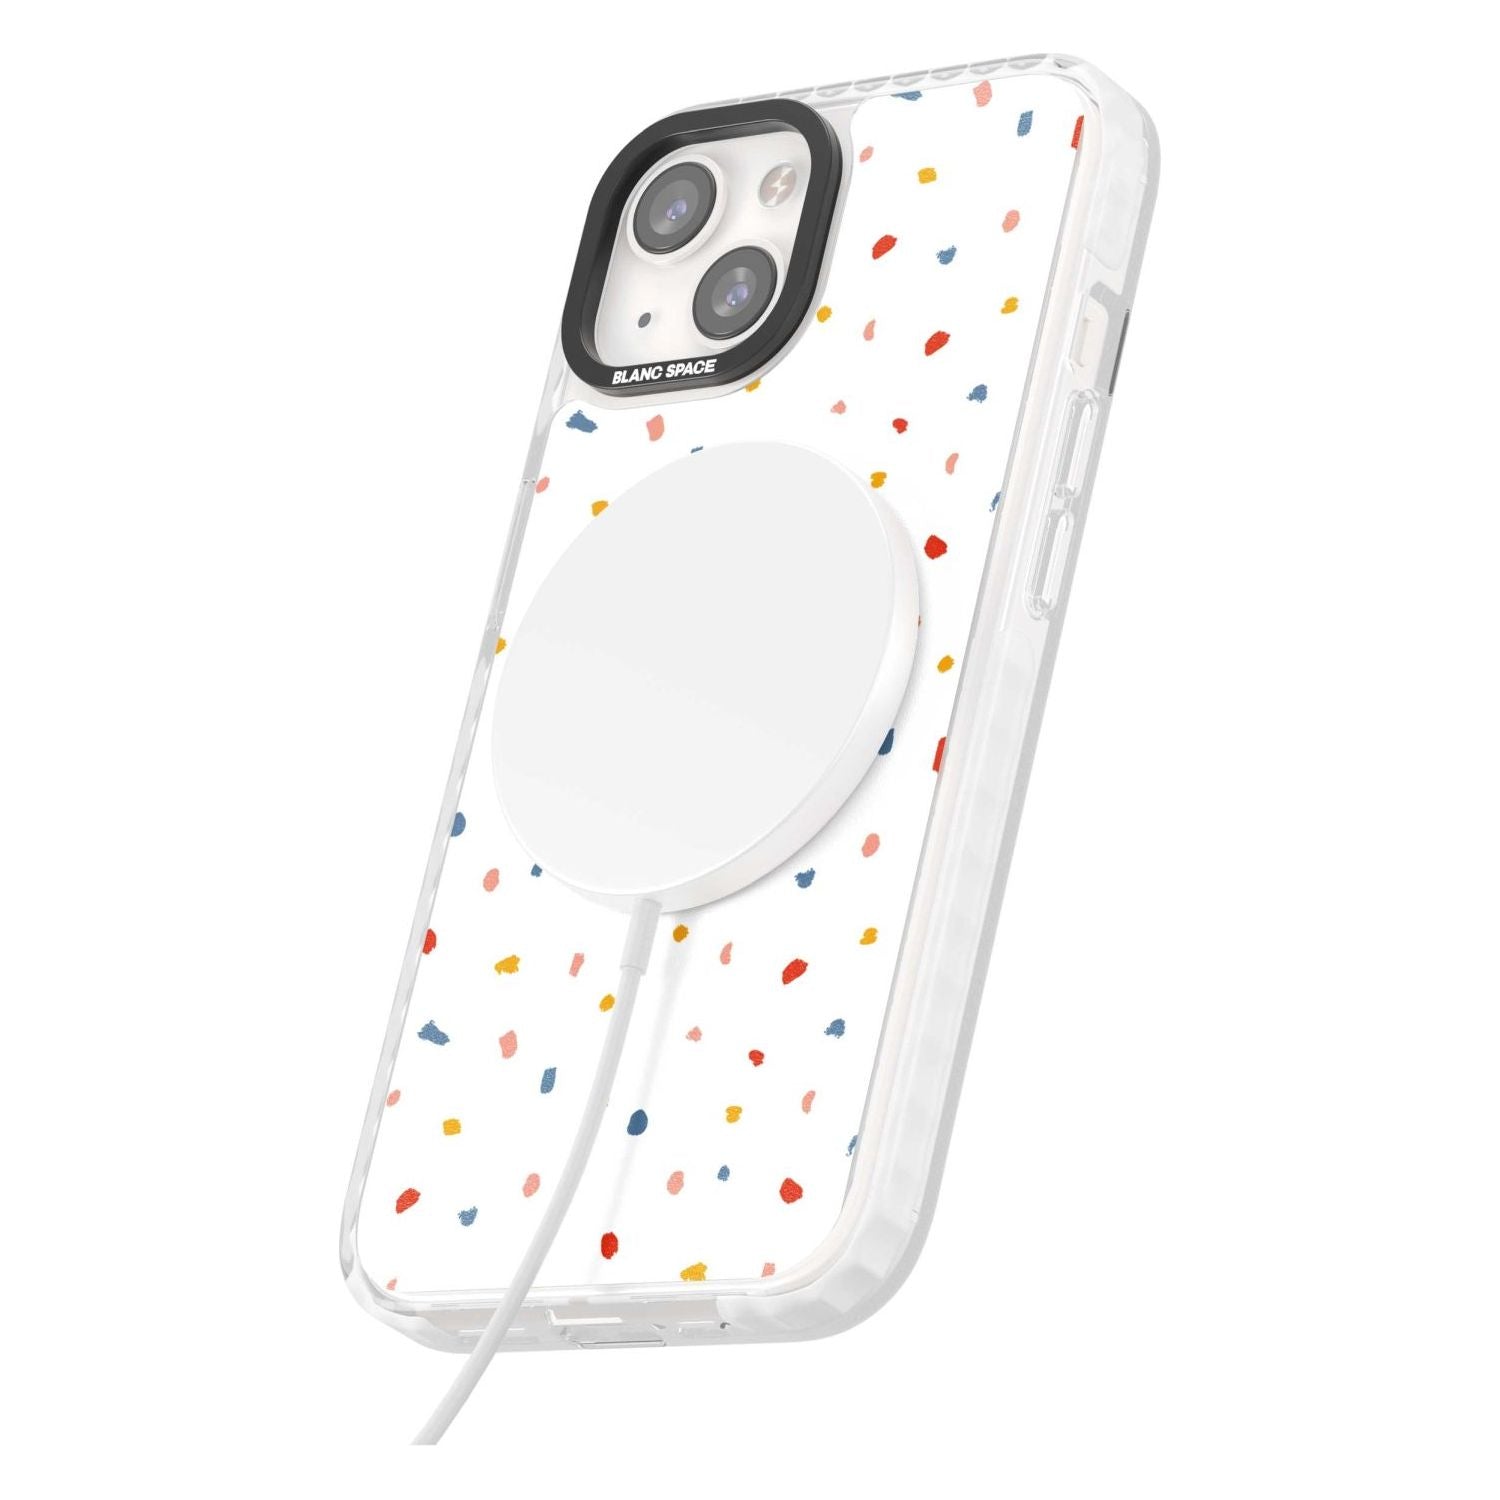 Confetti Print on Solid White Phone Case iPhone 15 Pro Max / Black Impact Case,iPhone 15 Plus / Black Impact Case,iPhone 15 Pro / Black Impact Case,iPhone 15 / Black Impact Case,iPhone 15 Pro Max / Impact Case,iPhone 15 Plus / Impact Case,iPhone 15 Pro / Impact Case,iPhone 15 / Impact Case,iPhone 15 Pro Max / Magsafe Black Impact Case,iPhone 15 Plus / Magsafe Black Impact Case,iPhone 15 Pro / Magsafe Black Impact Case,iPhone 15 / Magsafe Black Impact Case,iPhone 14 Pro Max / Black Impact Case,iPhone 14 Plus